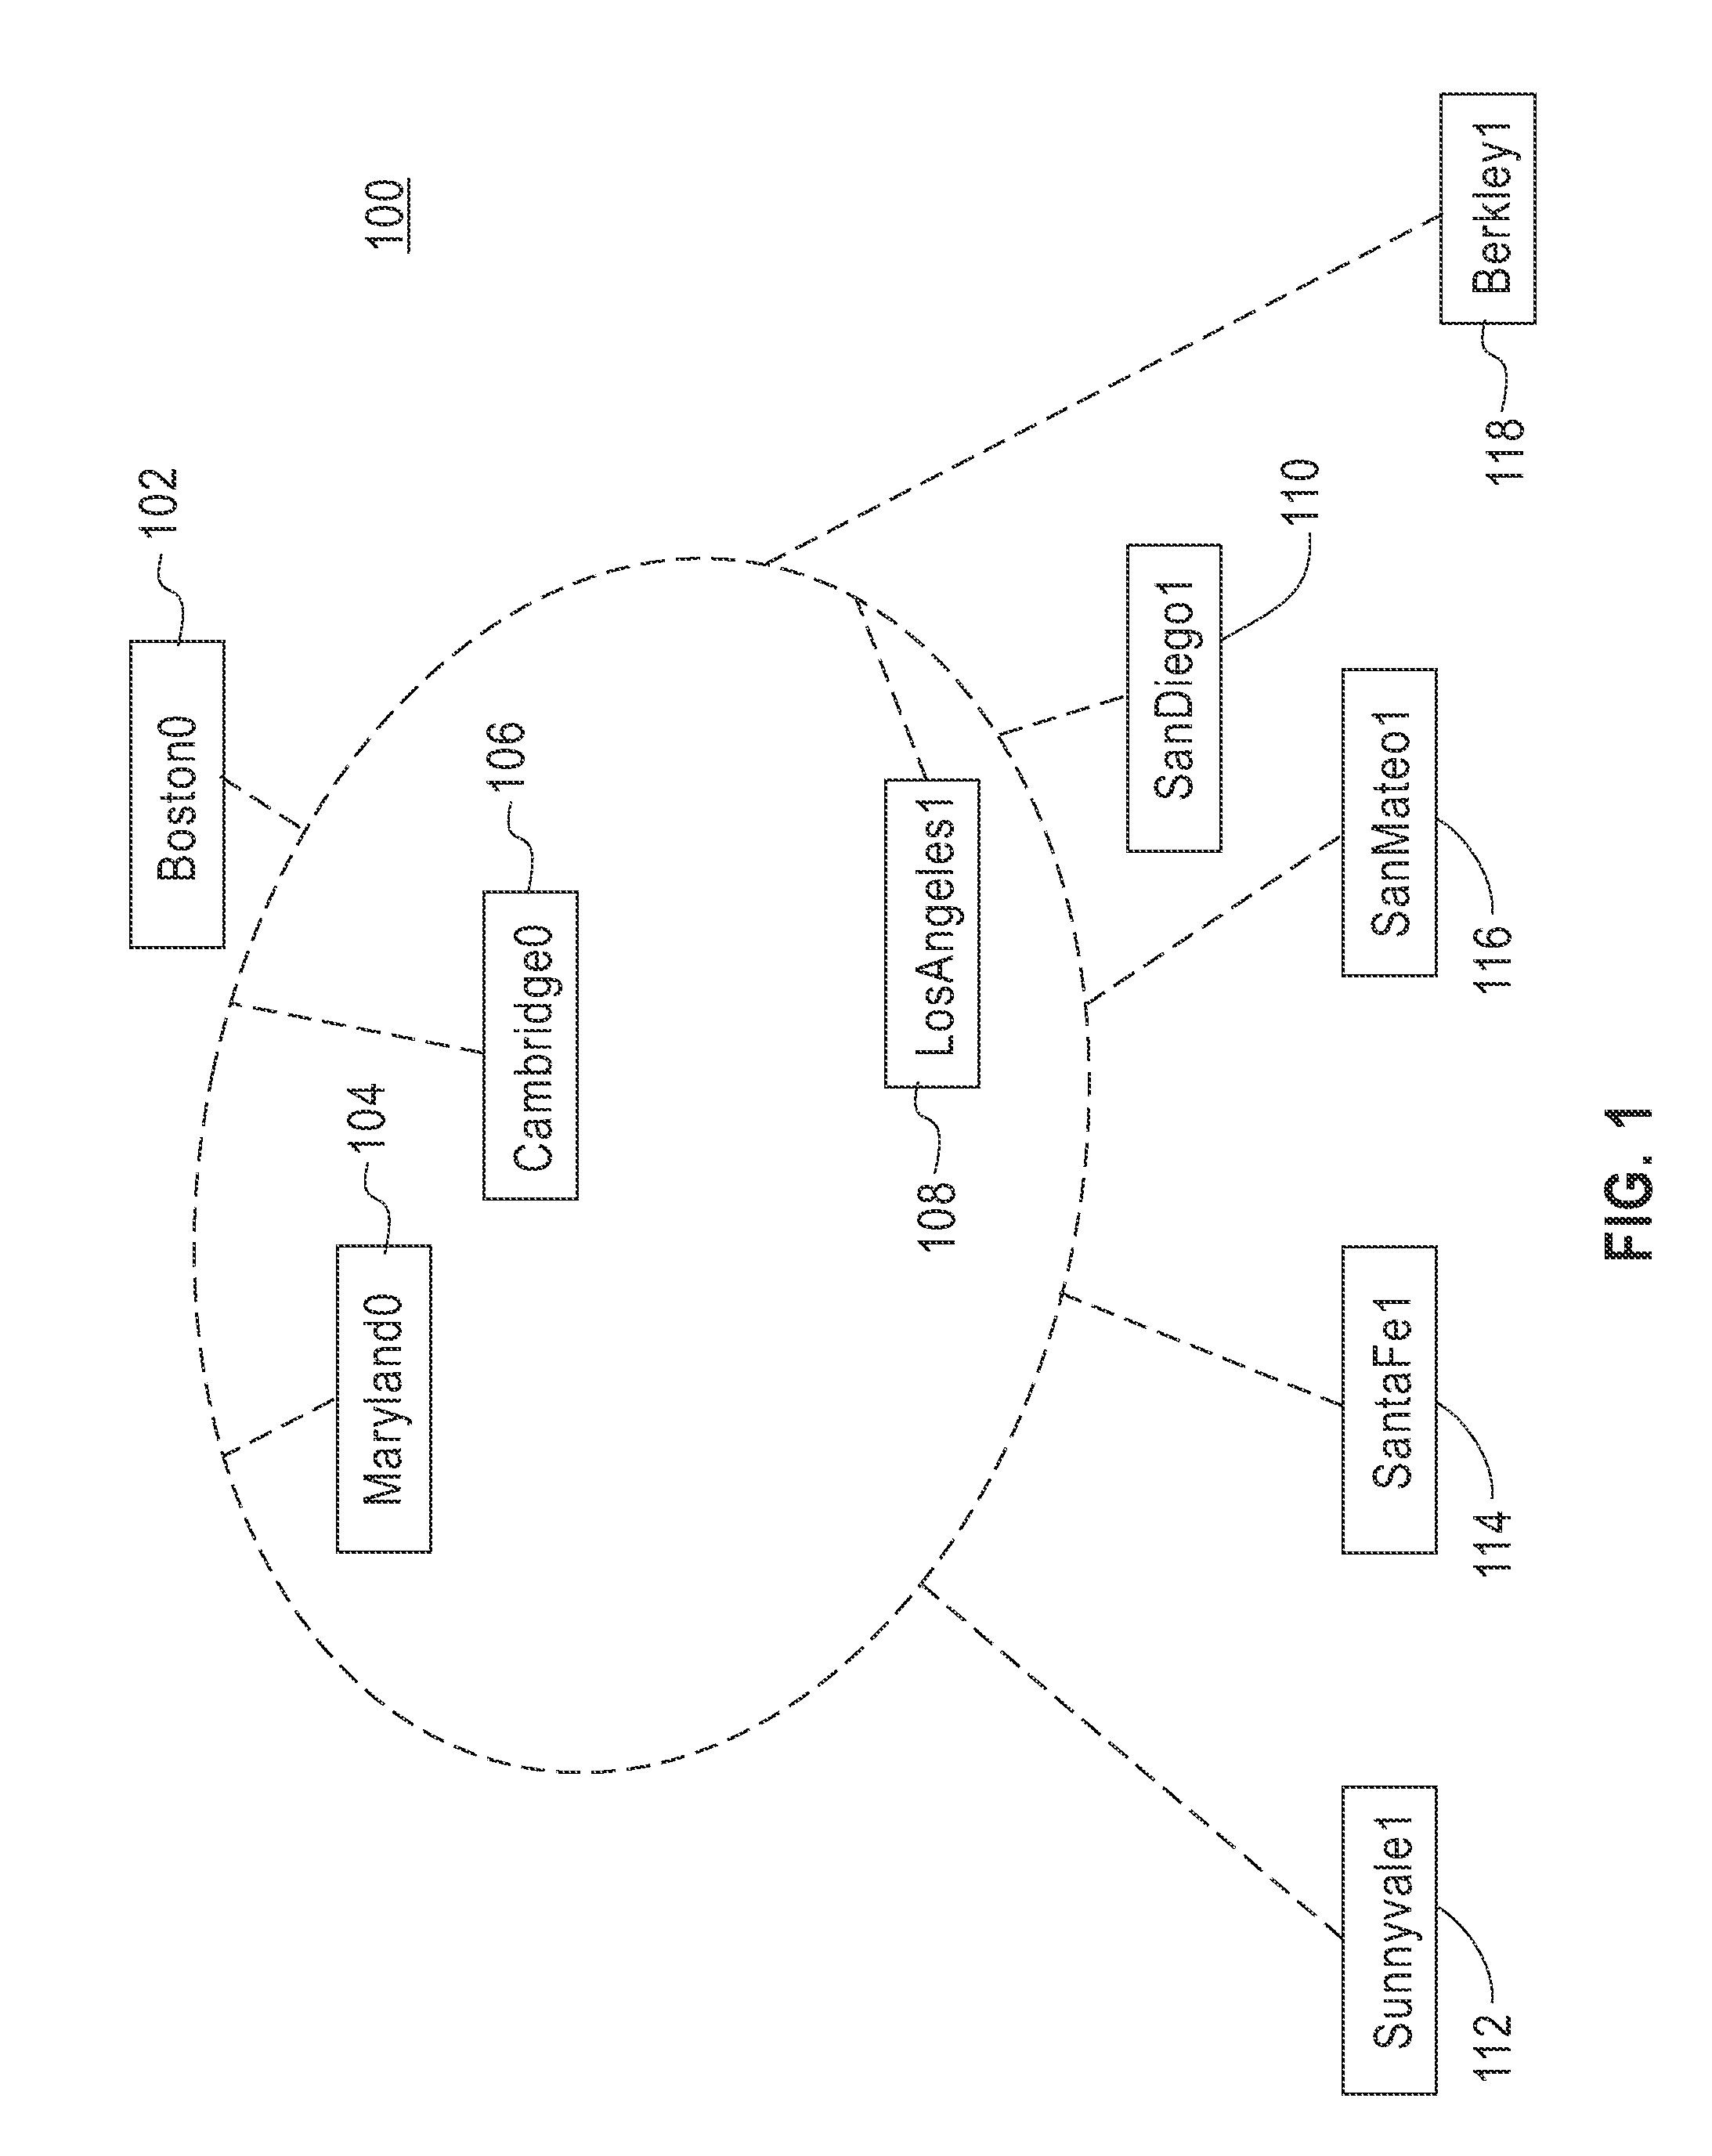 Method for generating an annotated network topology